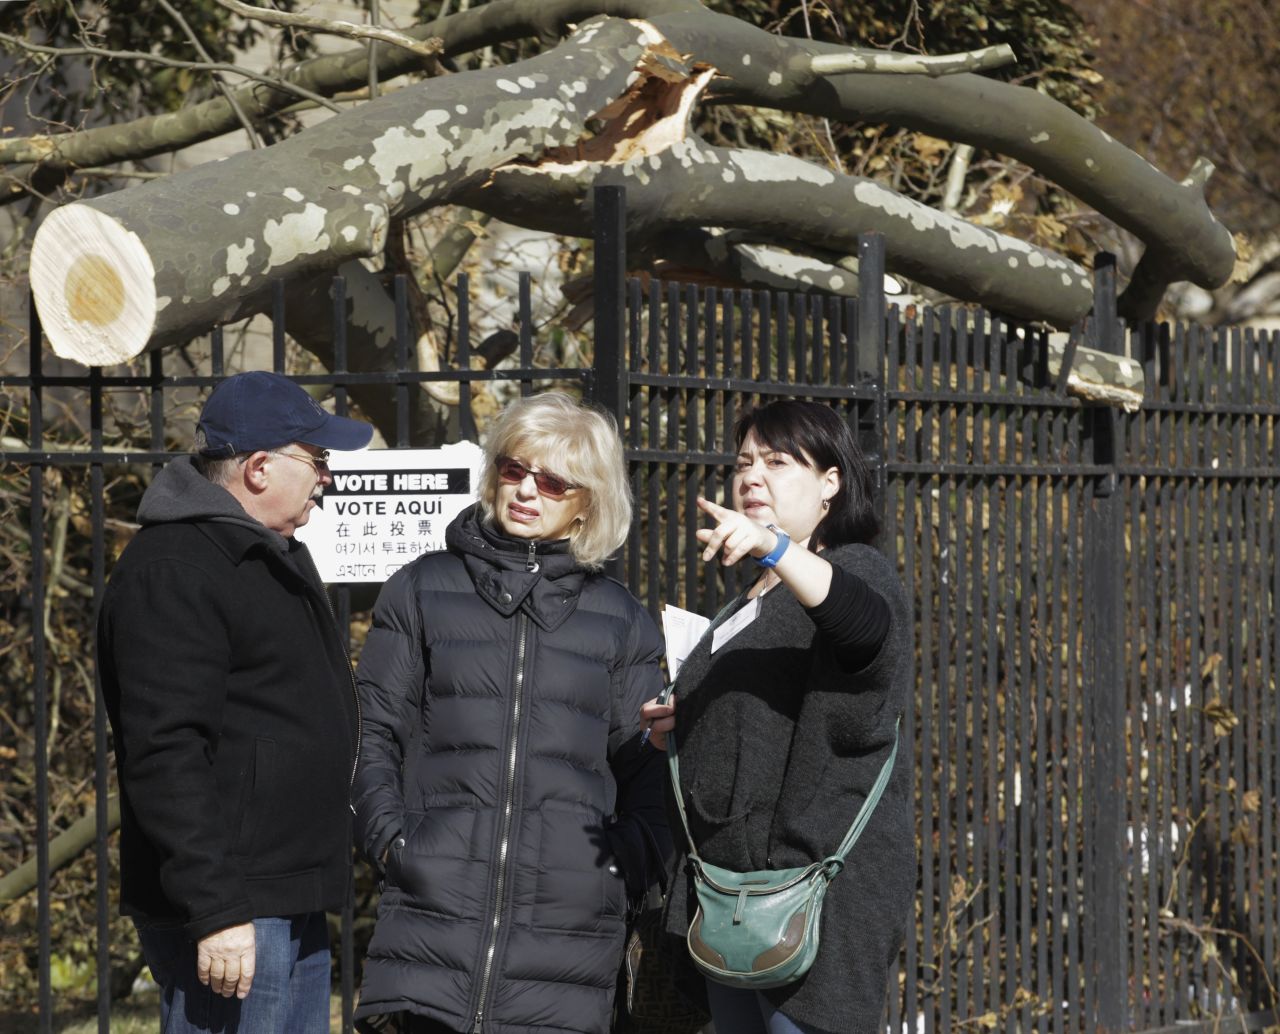 A poll worker directs people to a temporary polling center in the Coney Island section of Brooklyn, New York. Polling sites in Coney Island and the surrounding area were damaged during Superstorm Sandy.